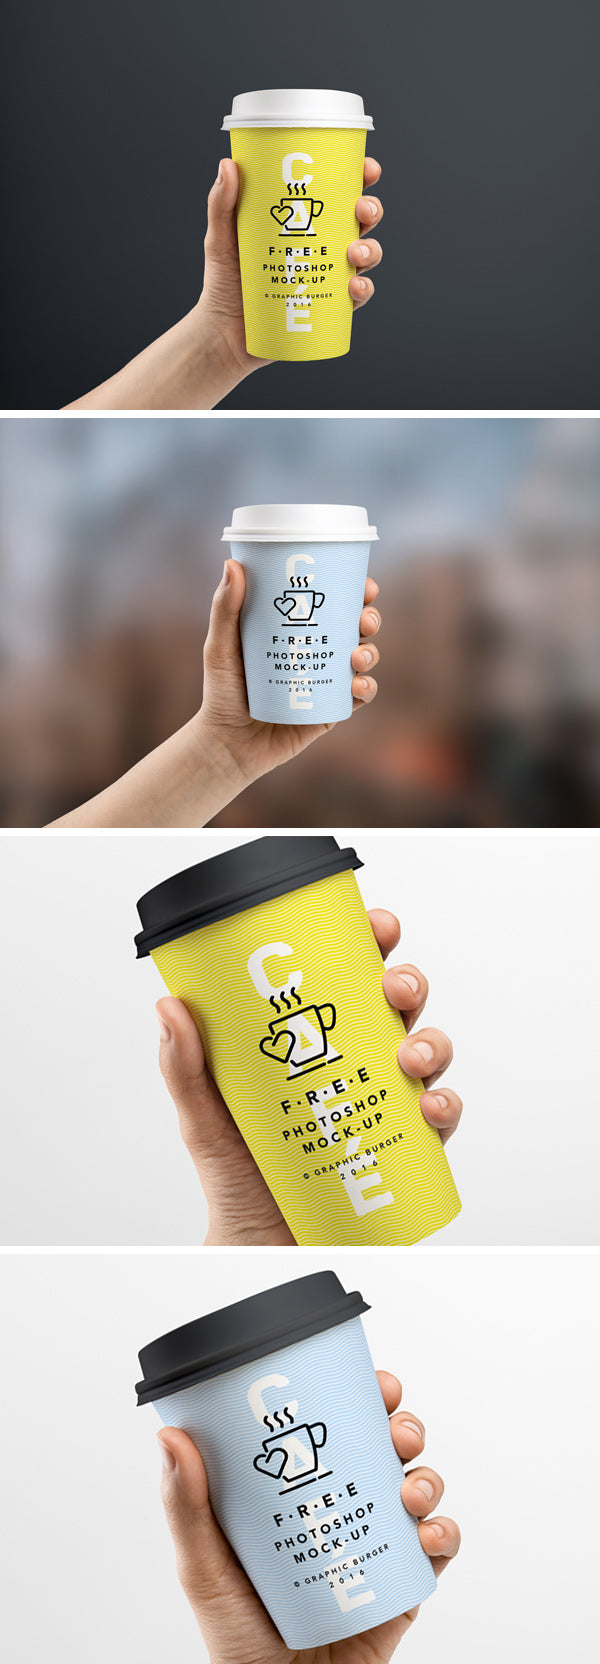 Free Coffee Cup In Hand MockUp